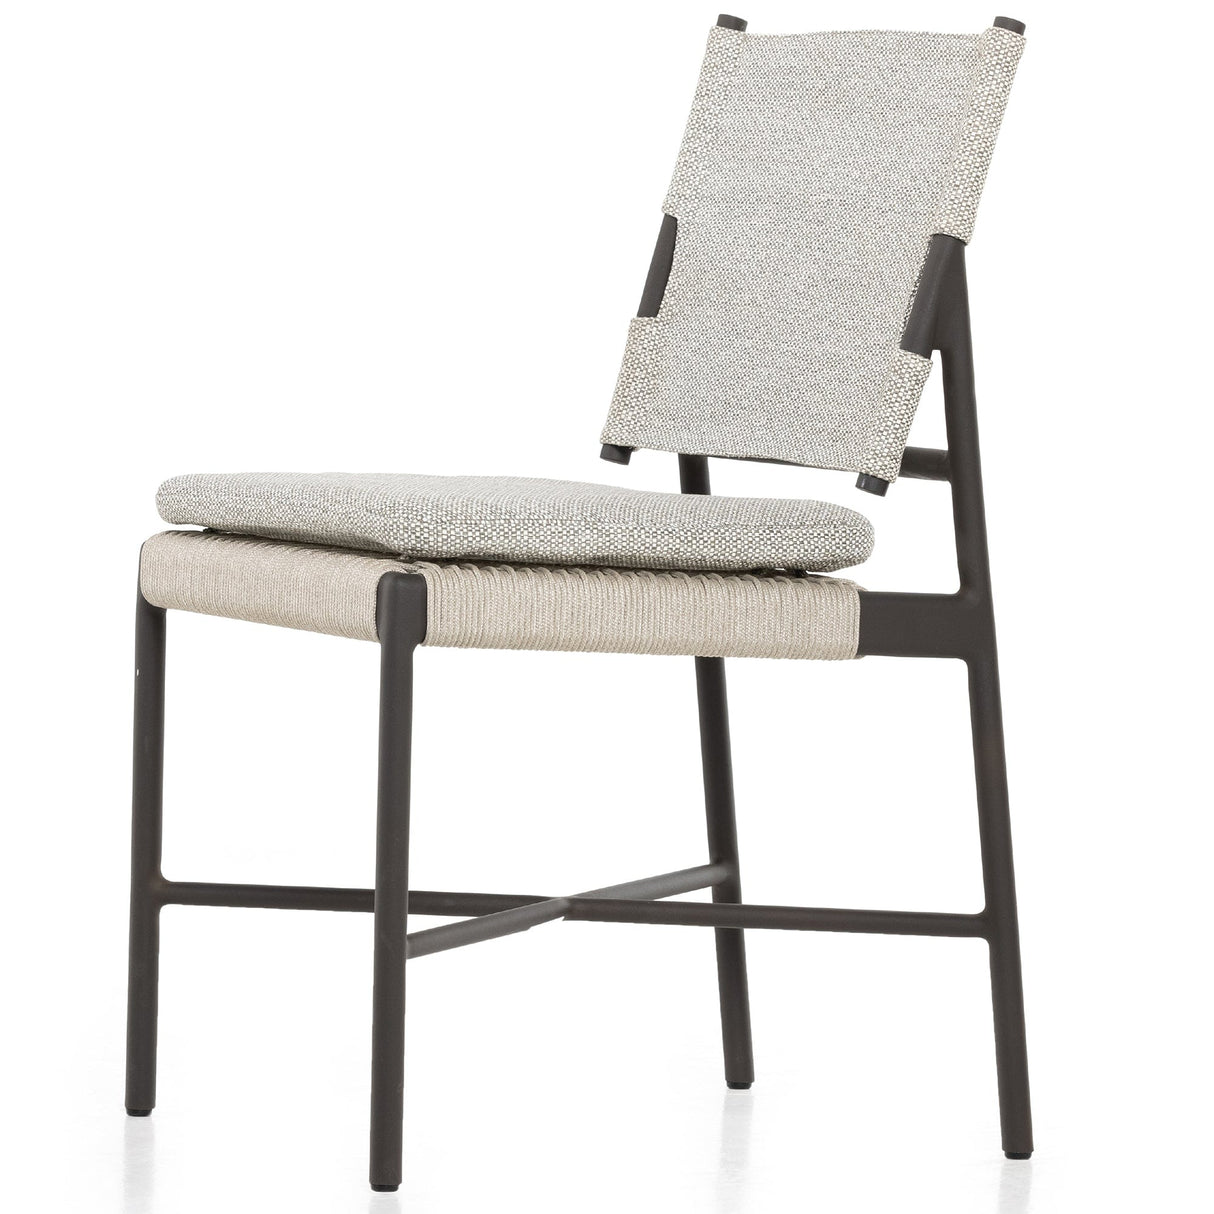 Four Hands Miller Outdoor Dining Chair Outdoor Furniture